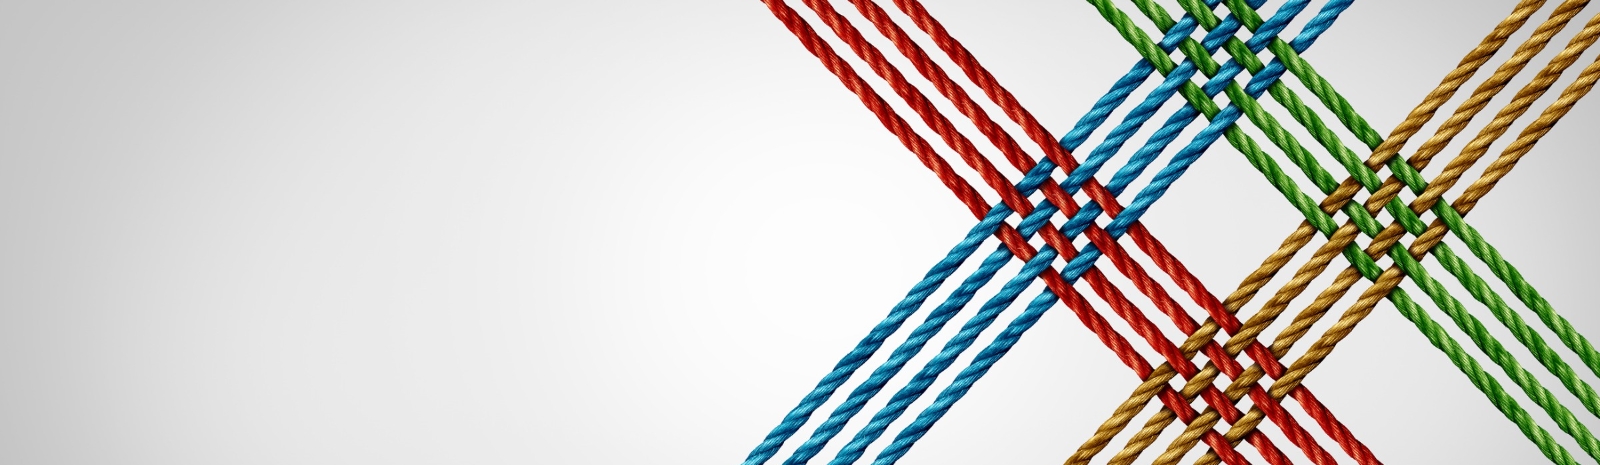 Crossing rope background